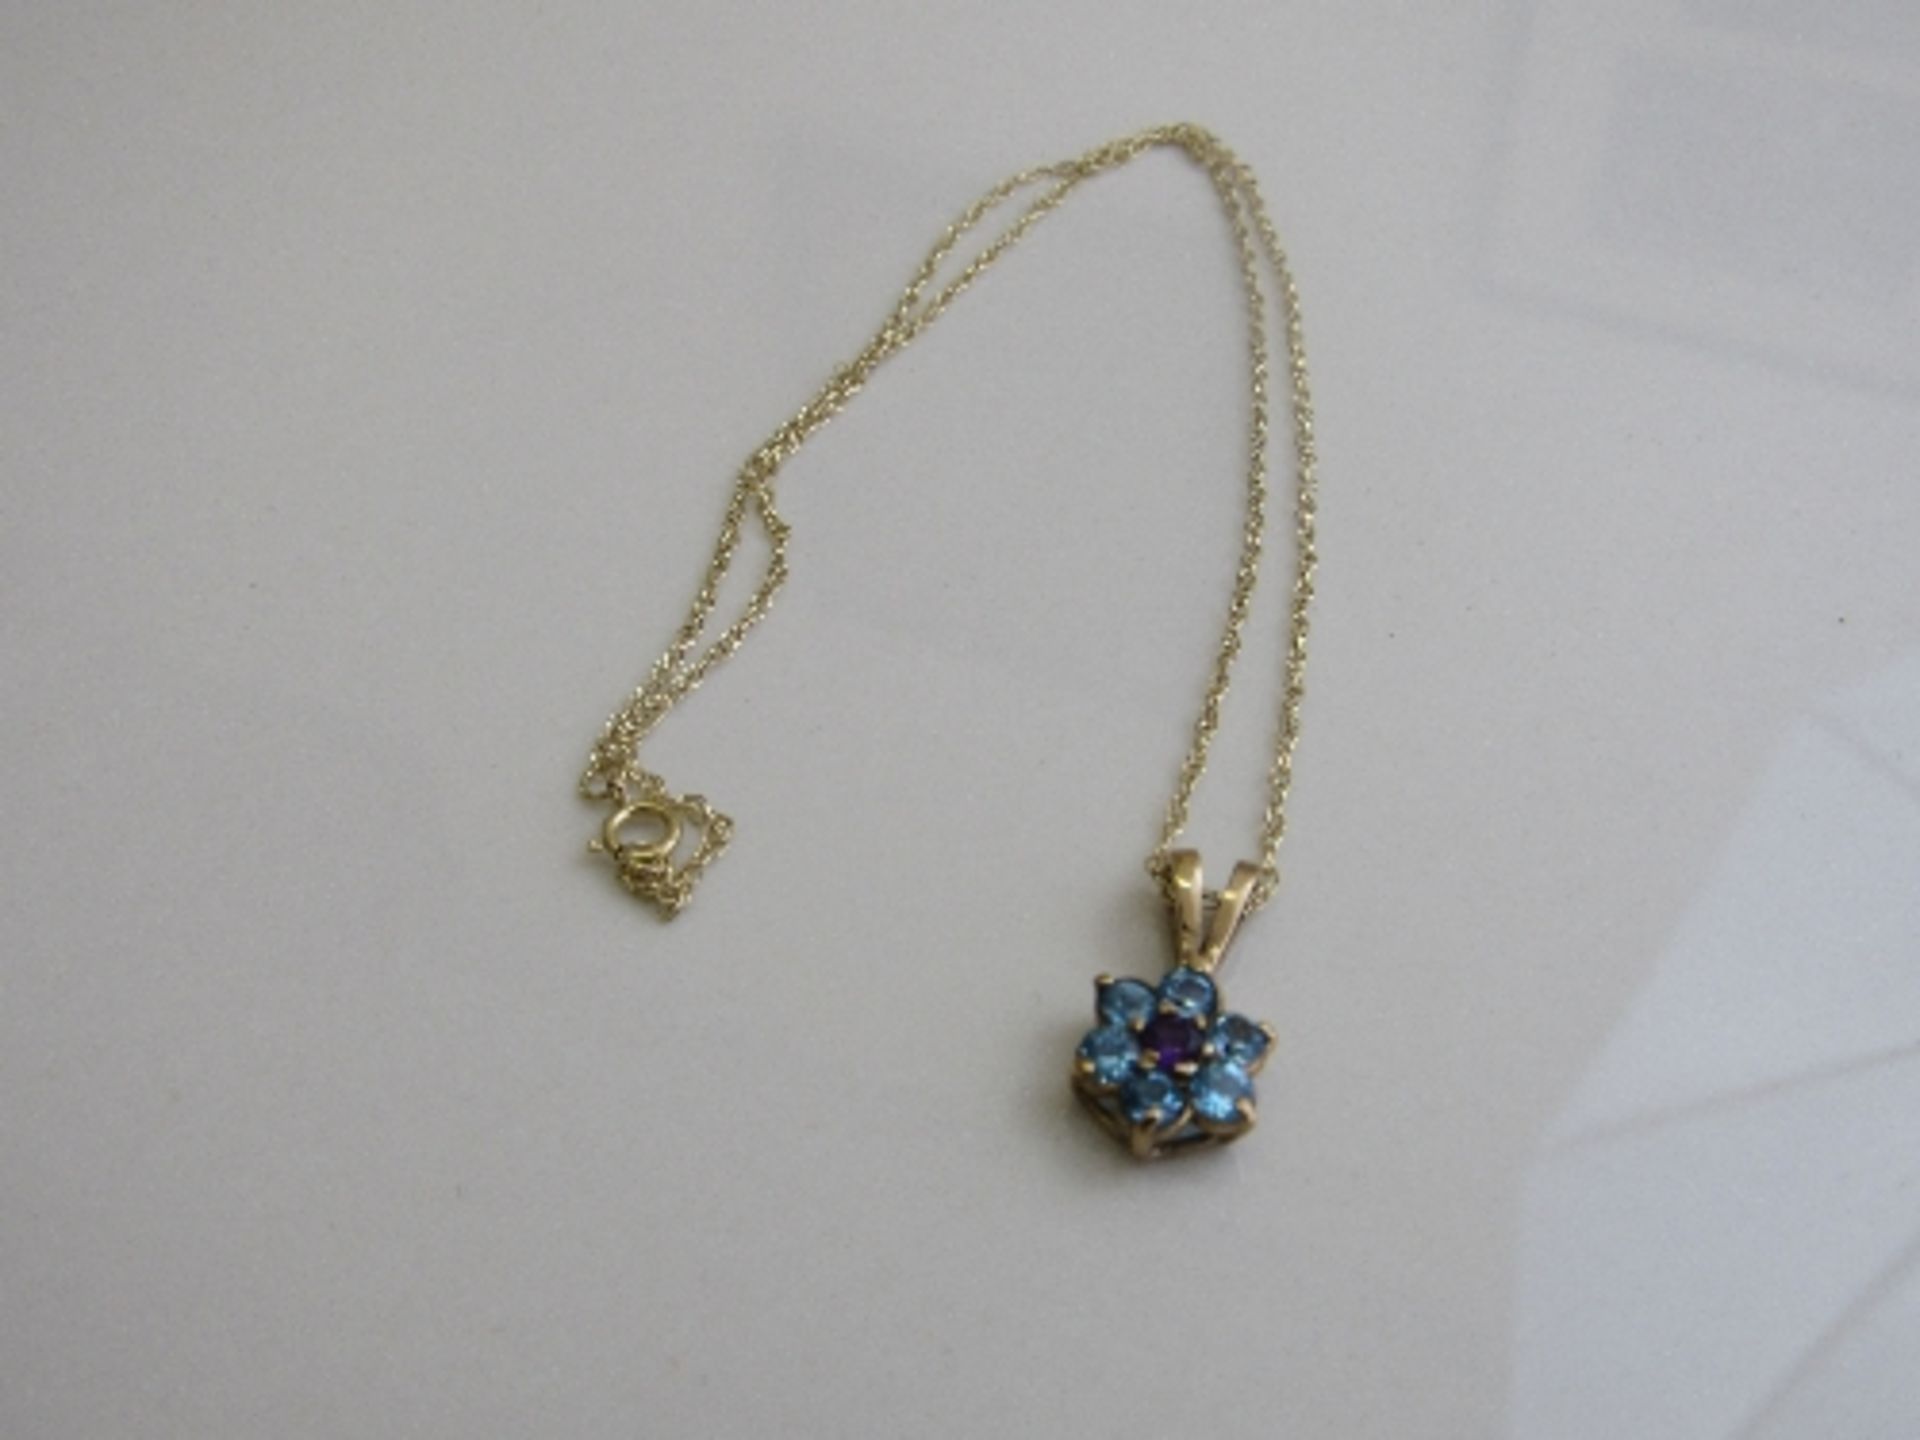 9ct gold, purple & pale blue stone flower pendant on 9ct gold chain, weight 1.9gms. Estimate £20-30